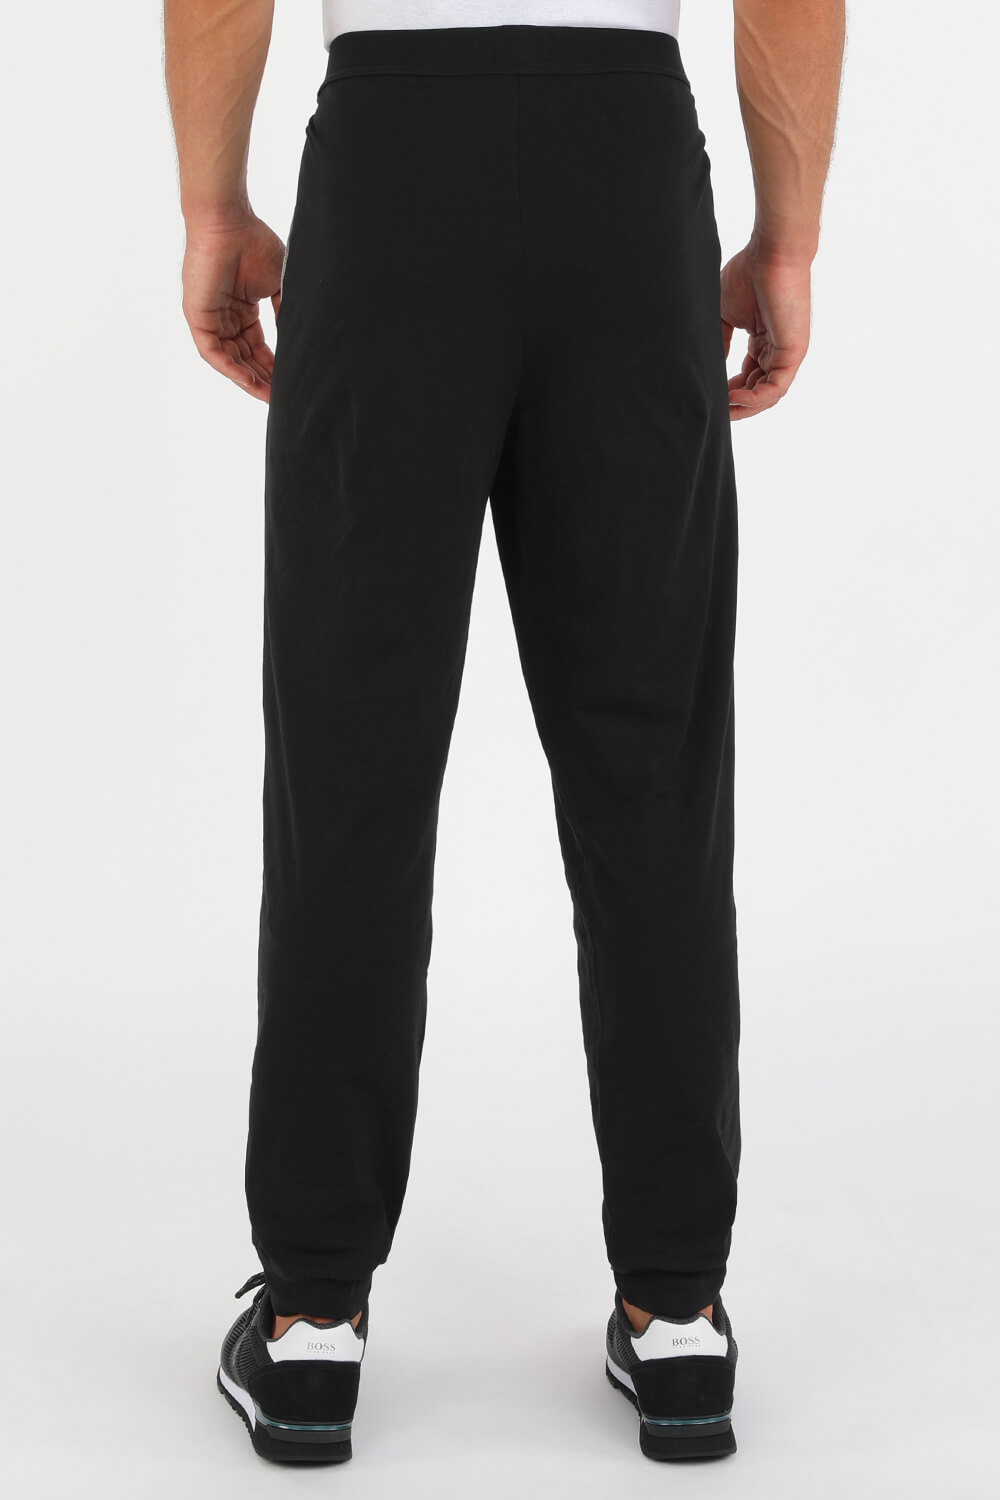 Mix And Match Pants in Black BOSS